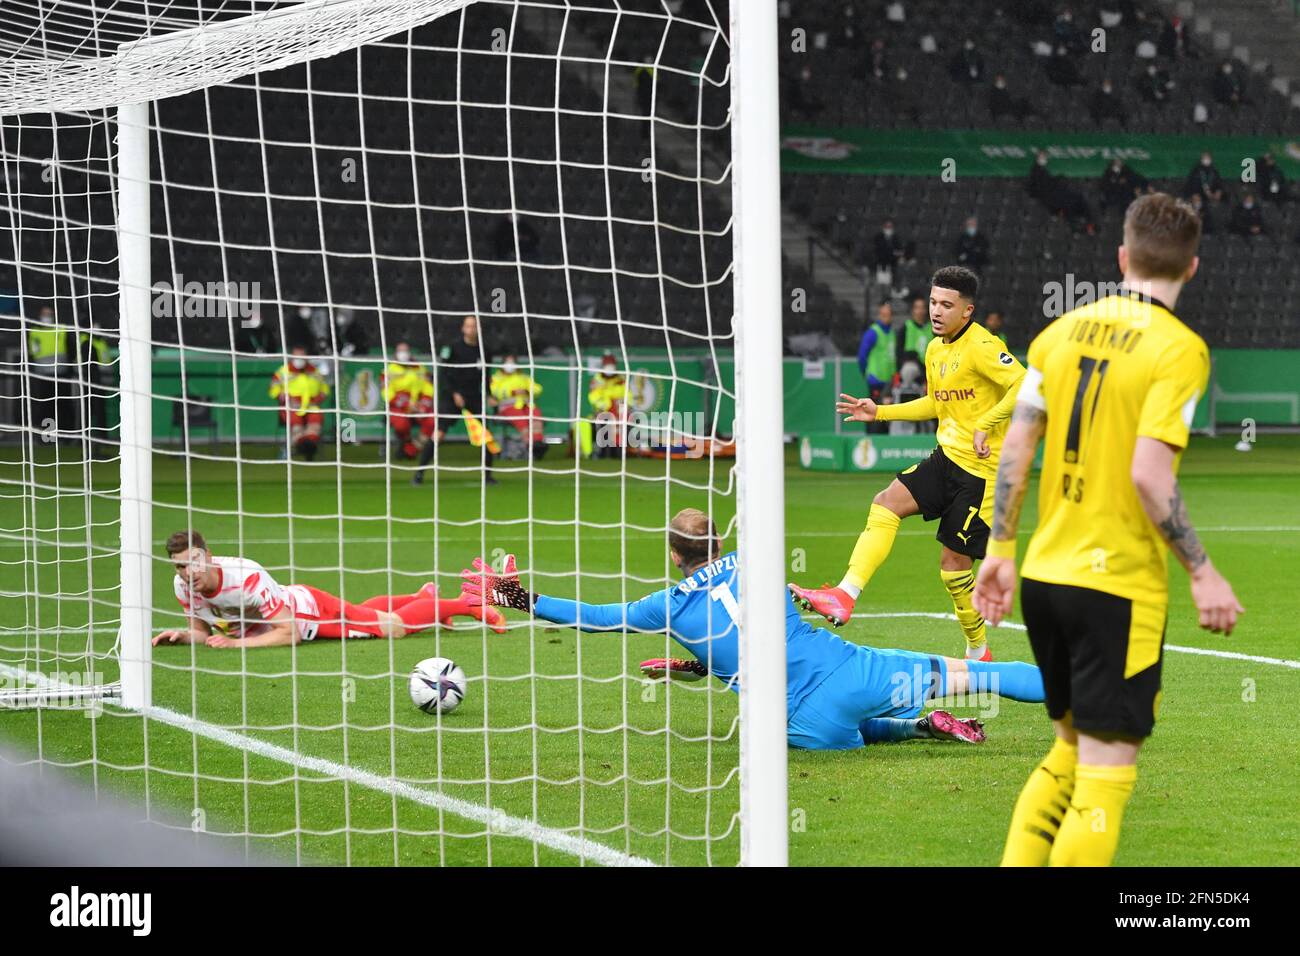 Berlin, Deutschland. 13th May, 2021. goal um 0-3 by Jadon SANCHO (Borussia Dortmund), action, goal shot versus goalwart Peter GULACSI (L), 78th DFB Pokal final, RB Leipzig (L) - Borussia Dortmund (DO) in the Olympiastadion in Berlin/Germany on 13.05. 2021. ## DFL/DFB regulations prohibit any use of photographs as image sequences and/or quasi-video ## | usage worldwide Credit: dpa/Alamy Live News Stock Photo